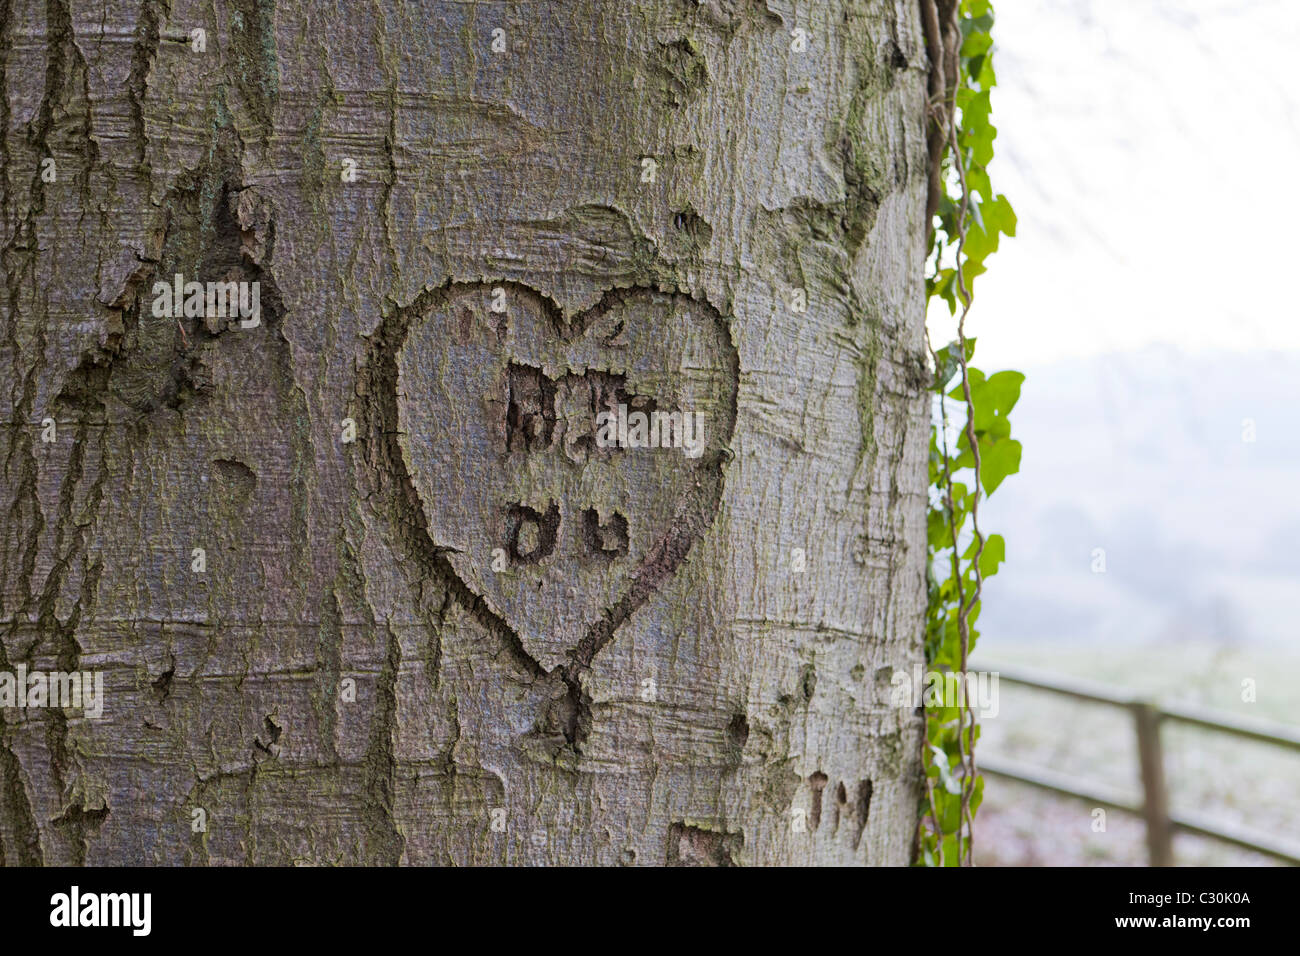 A heart with lovers initials carved in the bark of the trunk of a tree Stock Photo